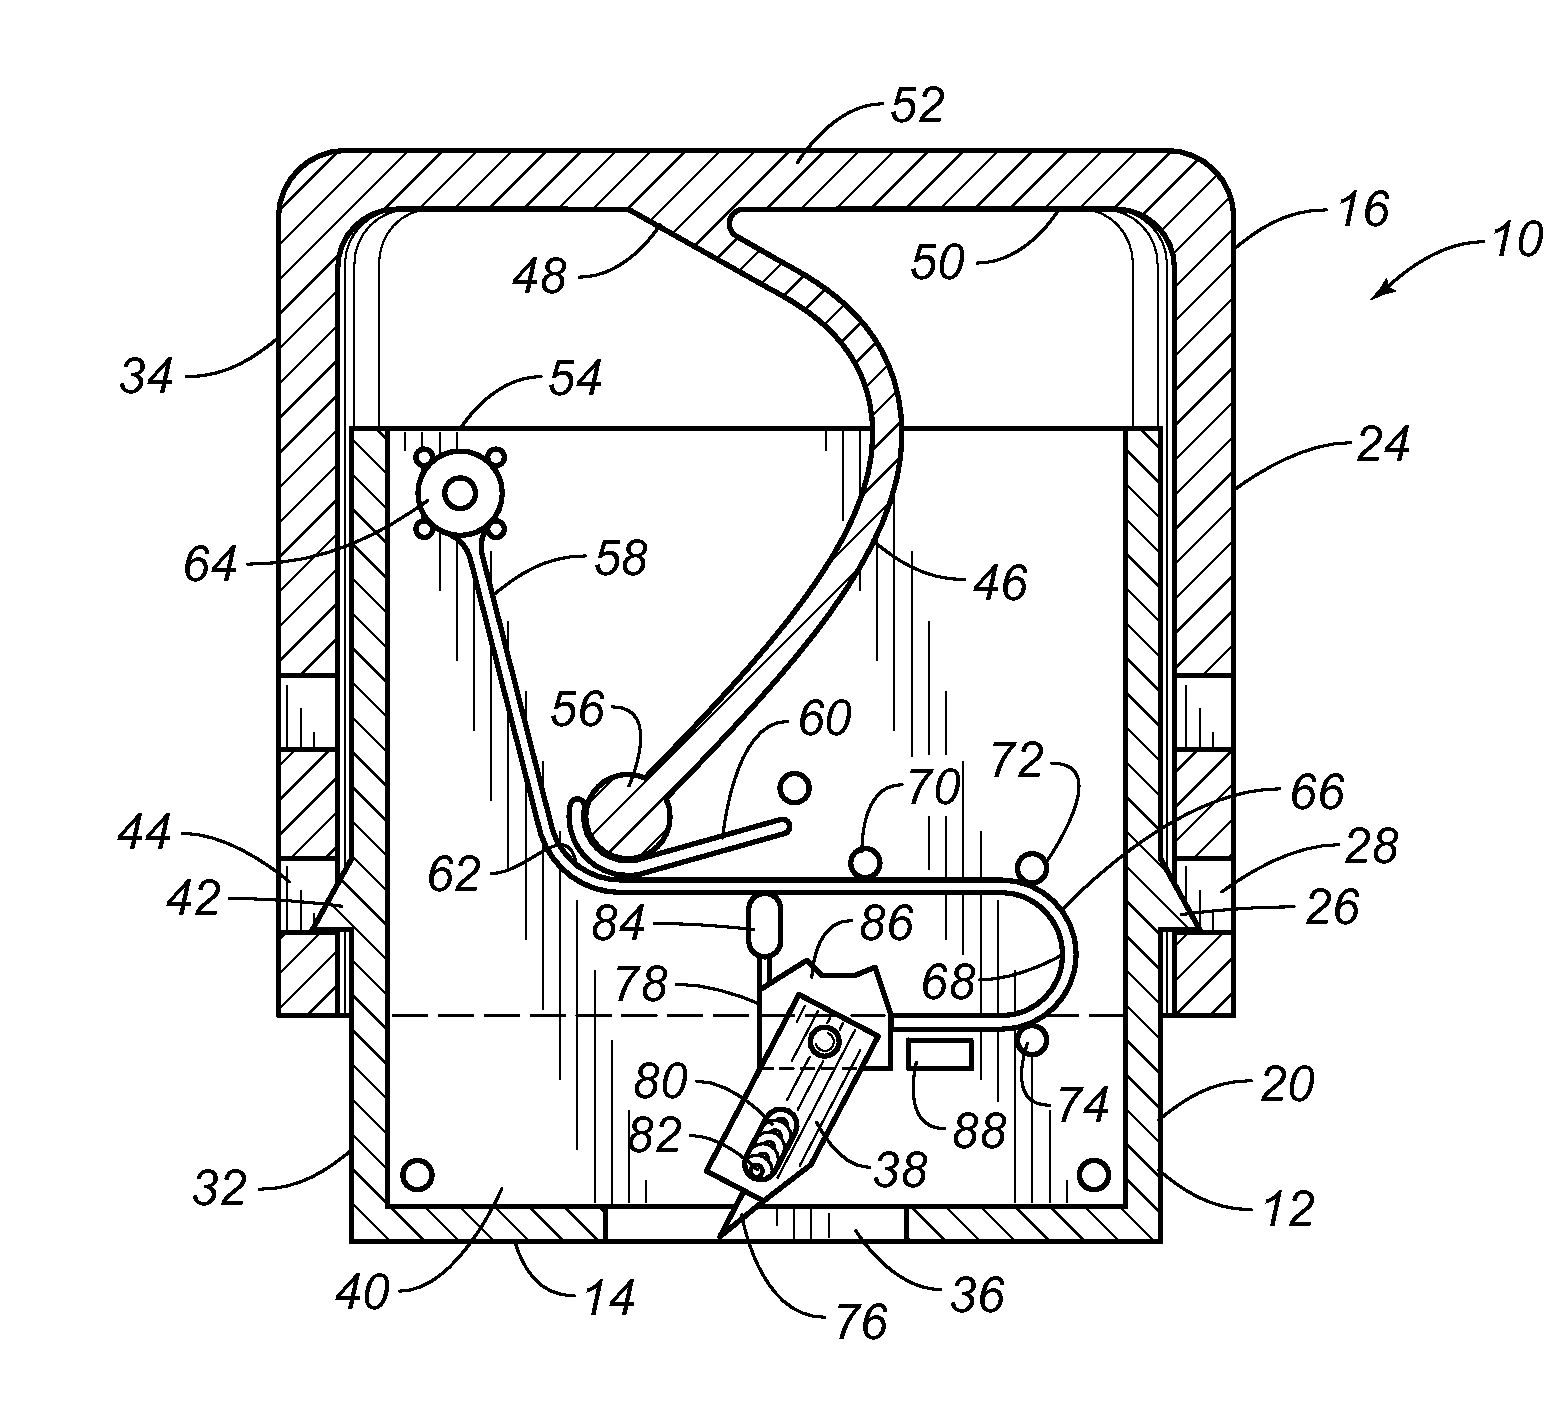 Load-controlled auto-actuated skin incision device